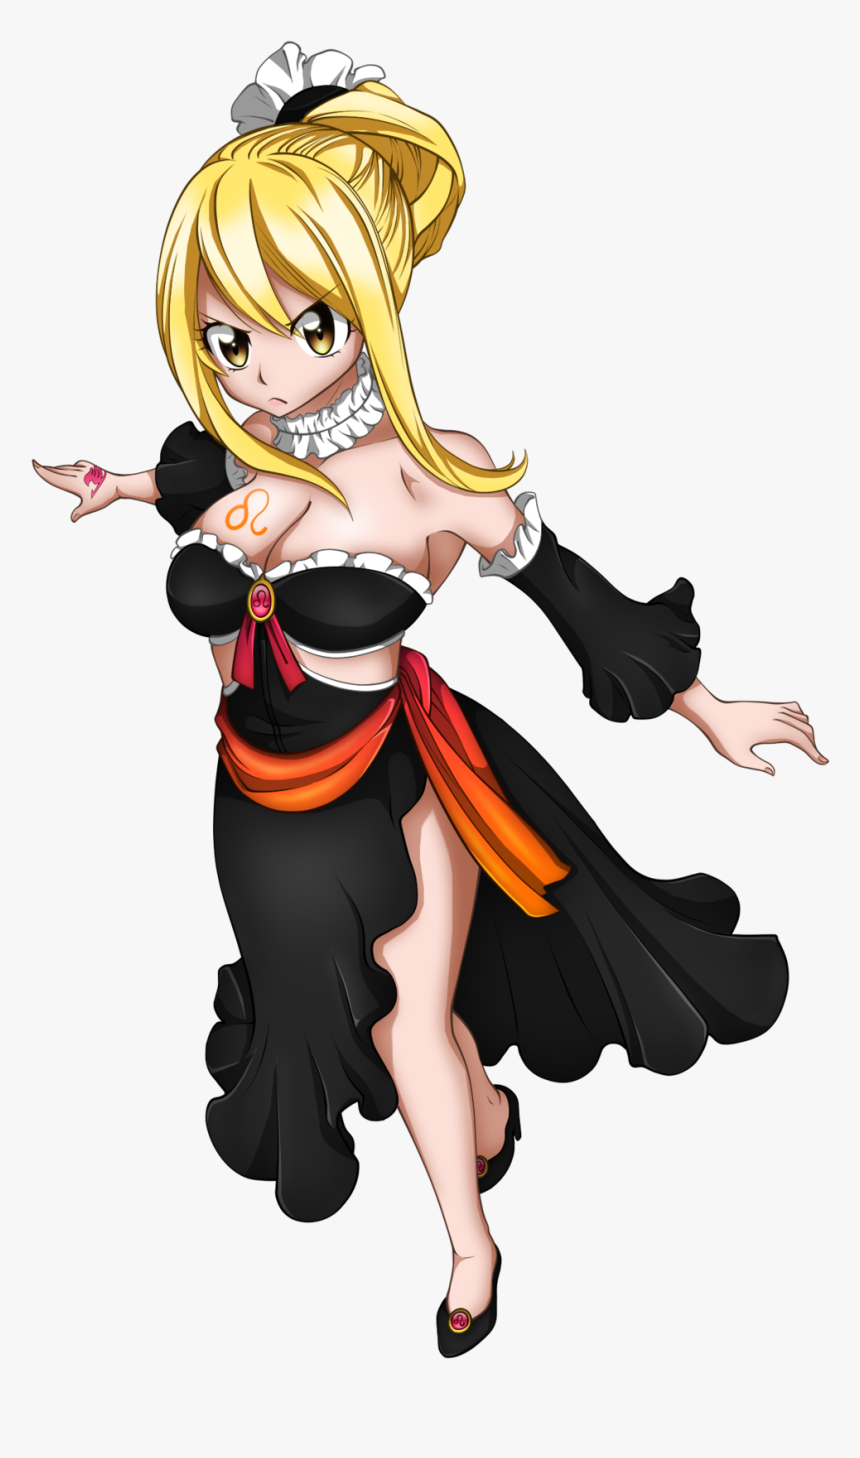 Fairy Tail 385 Aquarius Power Lucy By Kemucampos-d7qigka - Fairy Tail Lucy Star Dress Leo Form, HD Png Download, Free Download